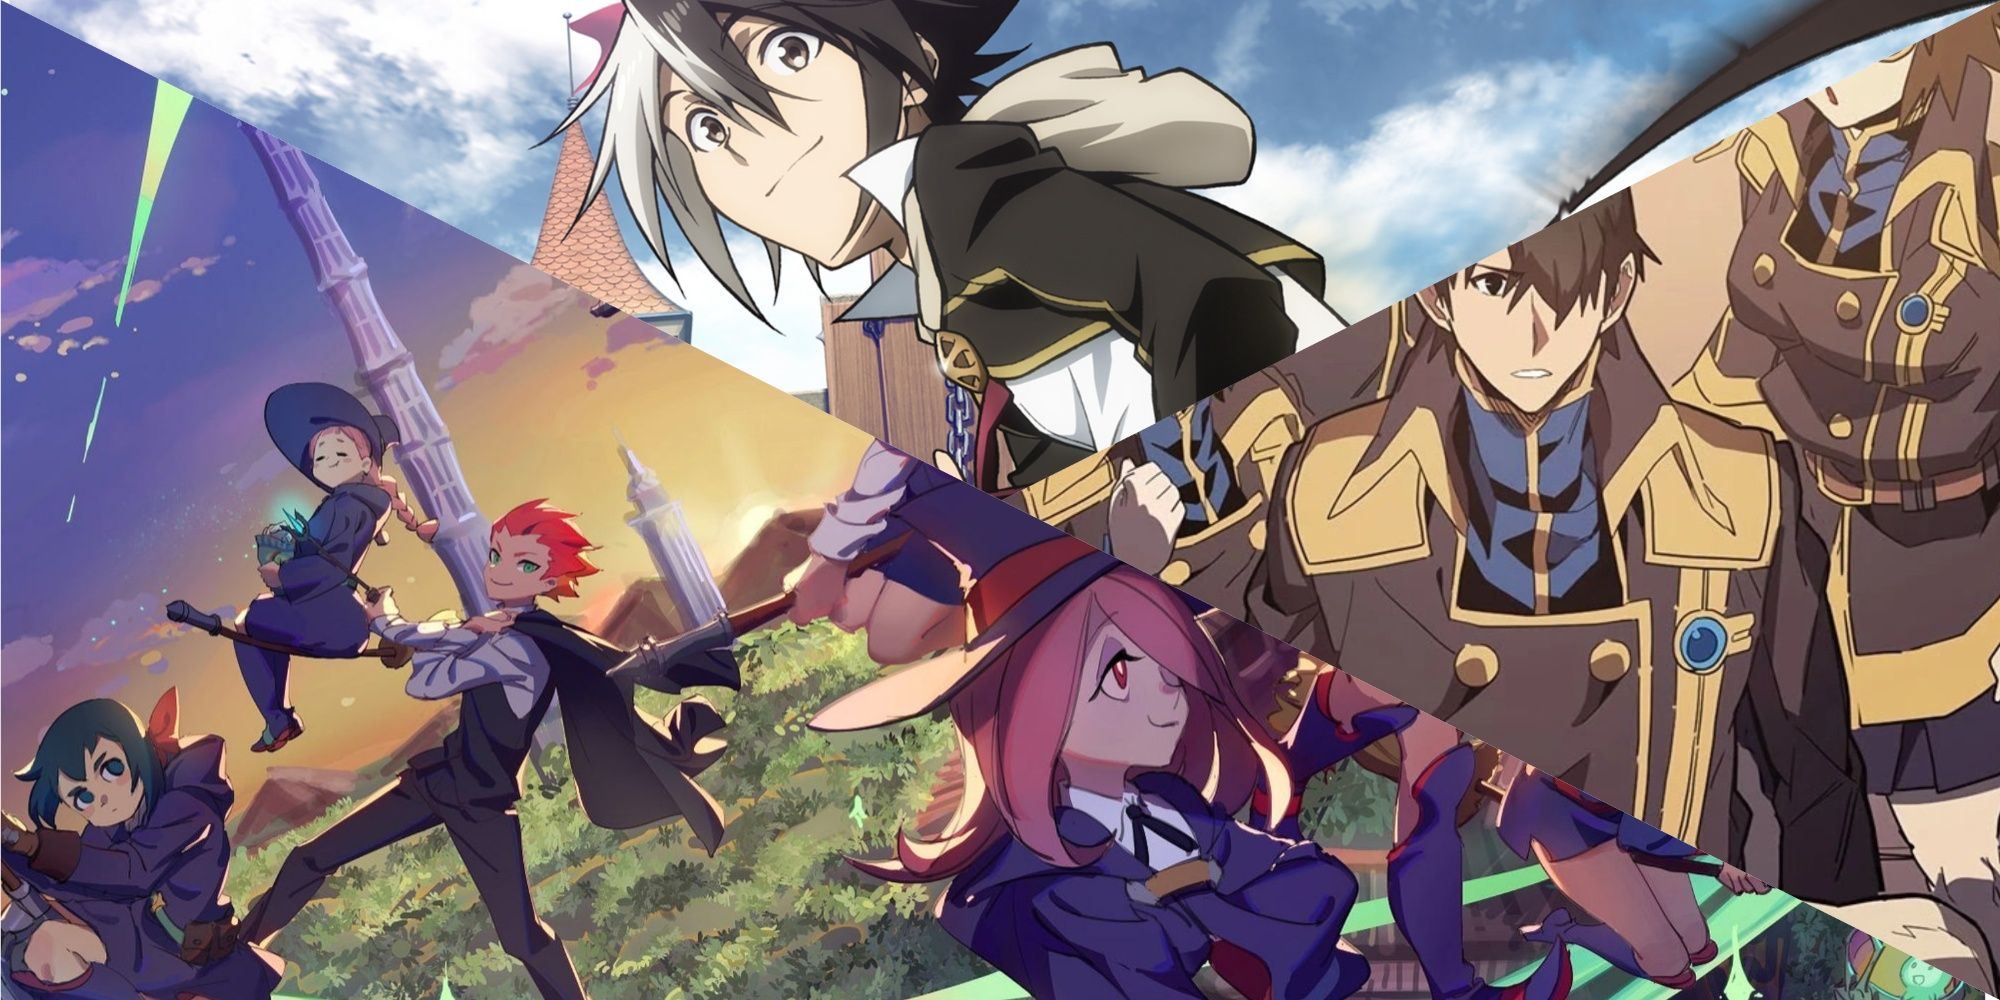 Anime Adventures: Teacher and Students of the Wizard Academy